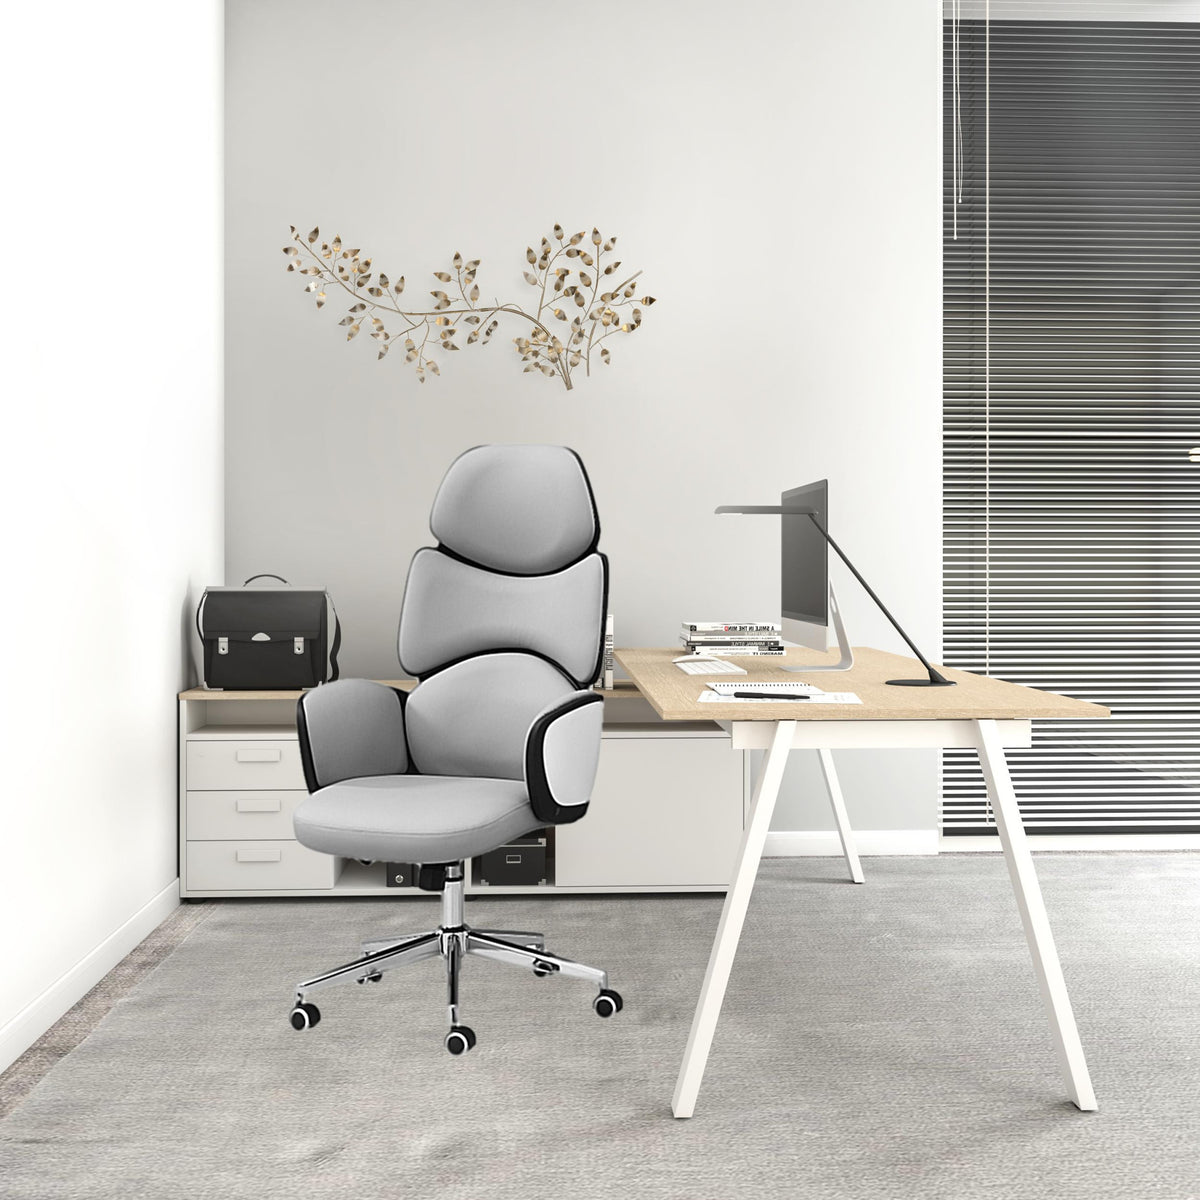 Grey Leather Look High Back Executive Office Chair